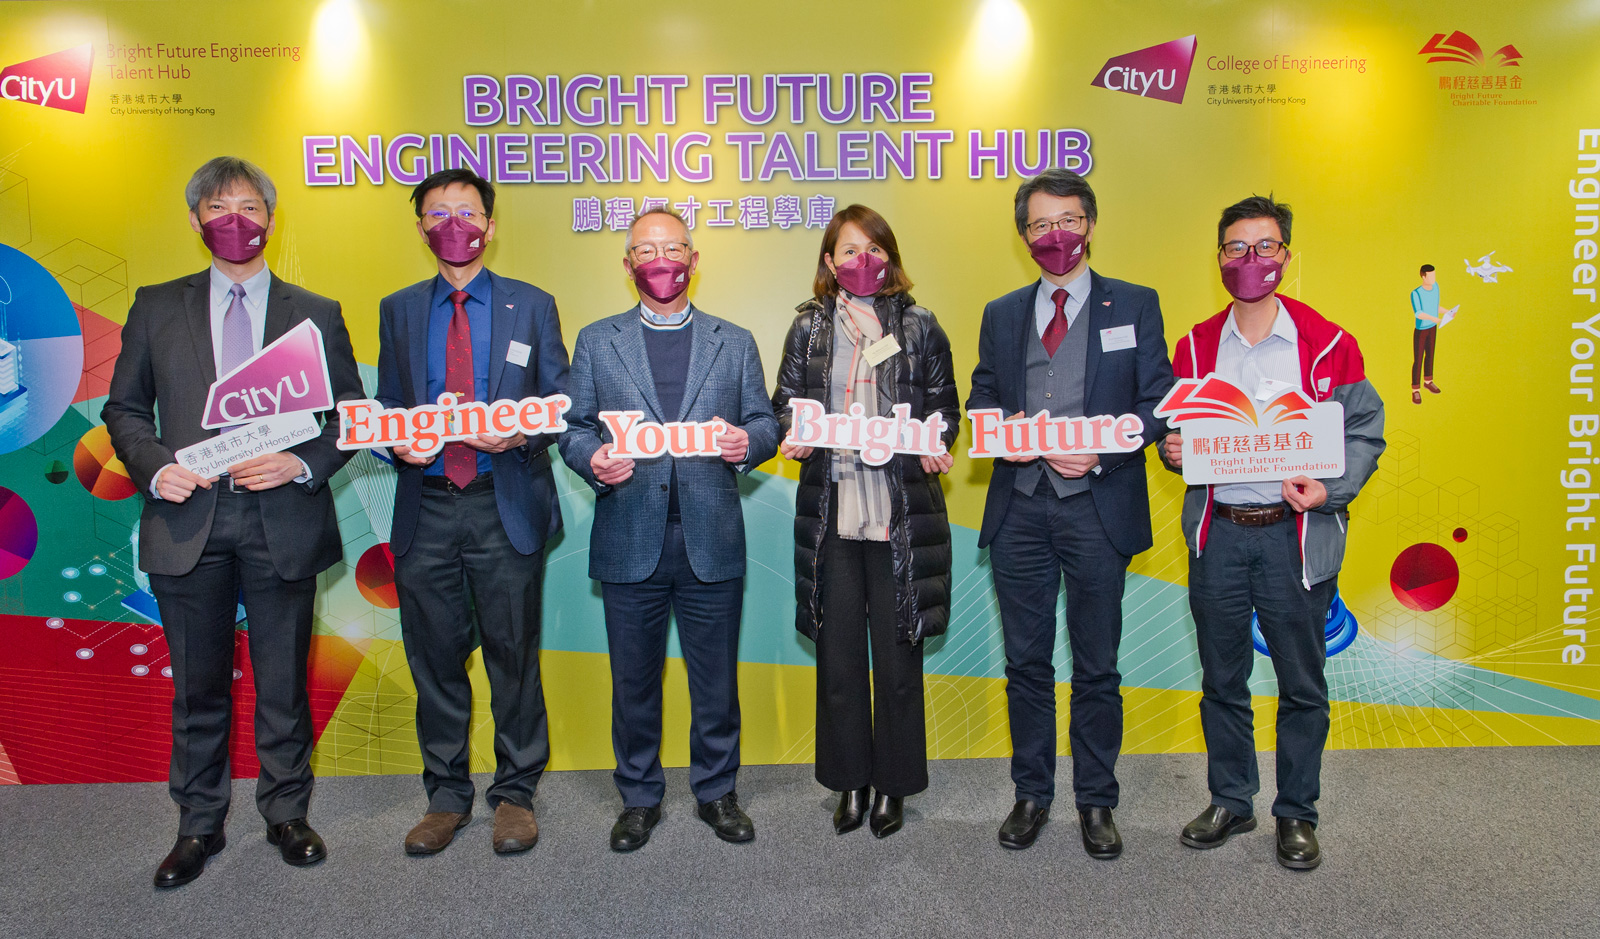 The College of Engineering at CityU announces the establishment of the Bright Future Engineering Talent Hub. Guests attended the Preview included: (from left) Professor Shek Chan-hung; Professor Kuo Tei-wei; Dr Roy Chung Chi-ping; (second from right) Professor Matthew Lee Kwok-on; Professor Henry Chung Shu-hung.